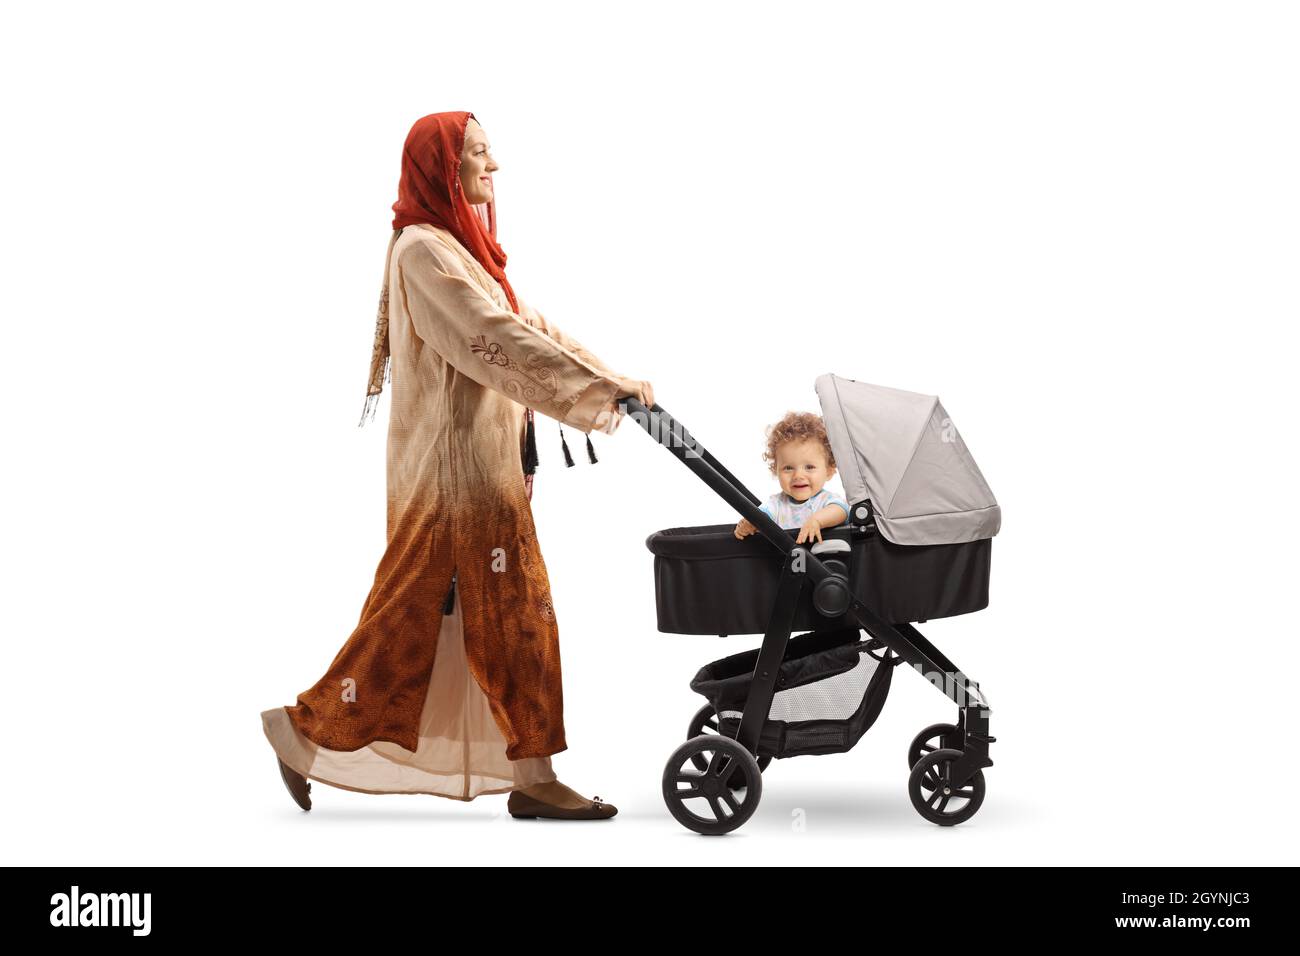 Full length profile shot of a woman wearing a hijab and pushing a baby boy in a stroller isolated on white background Stock Photo